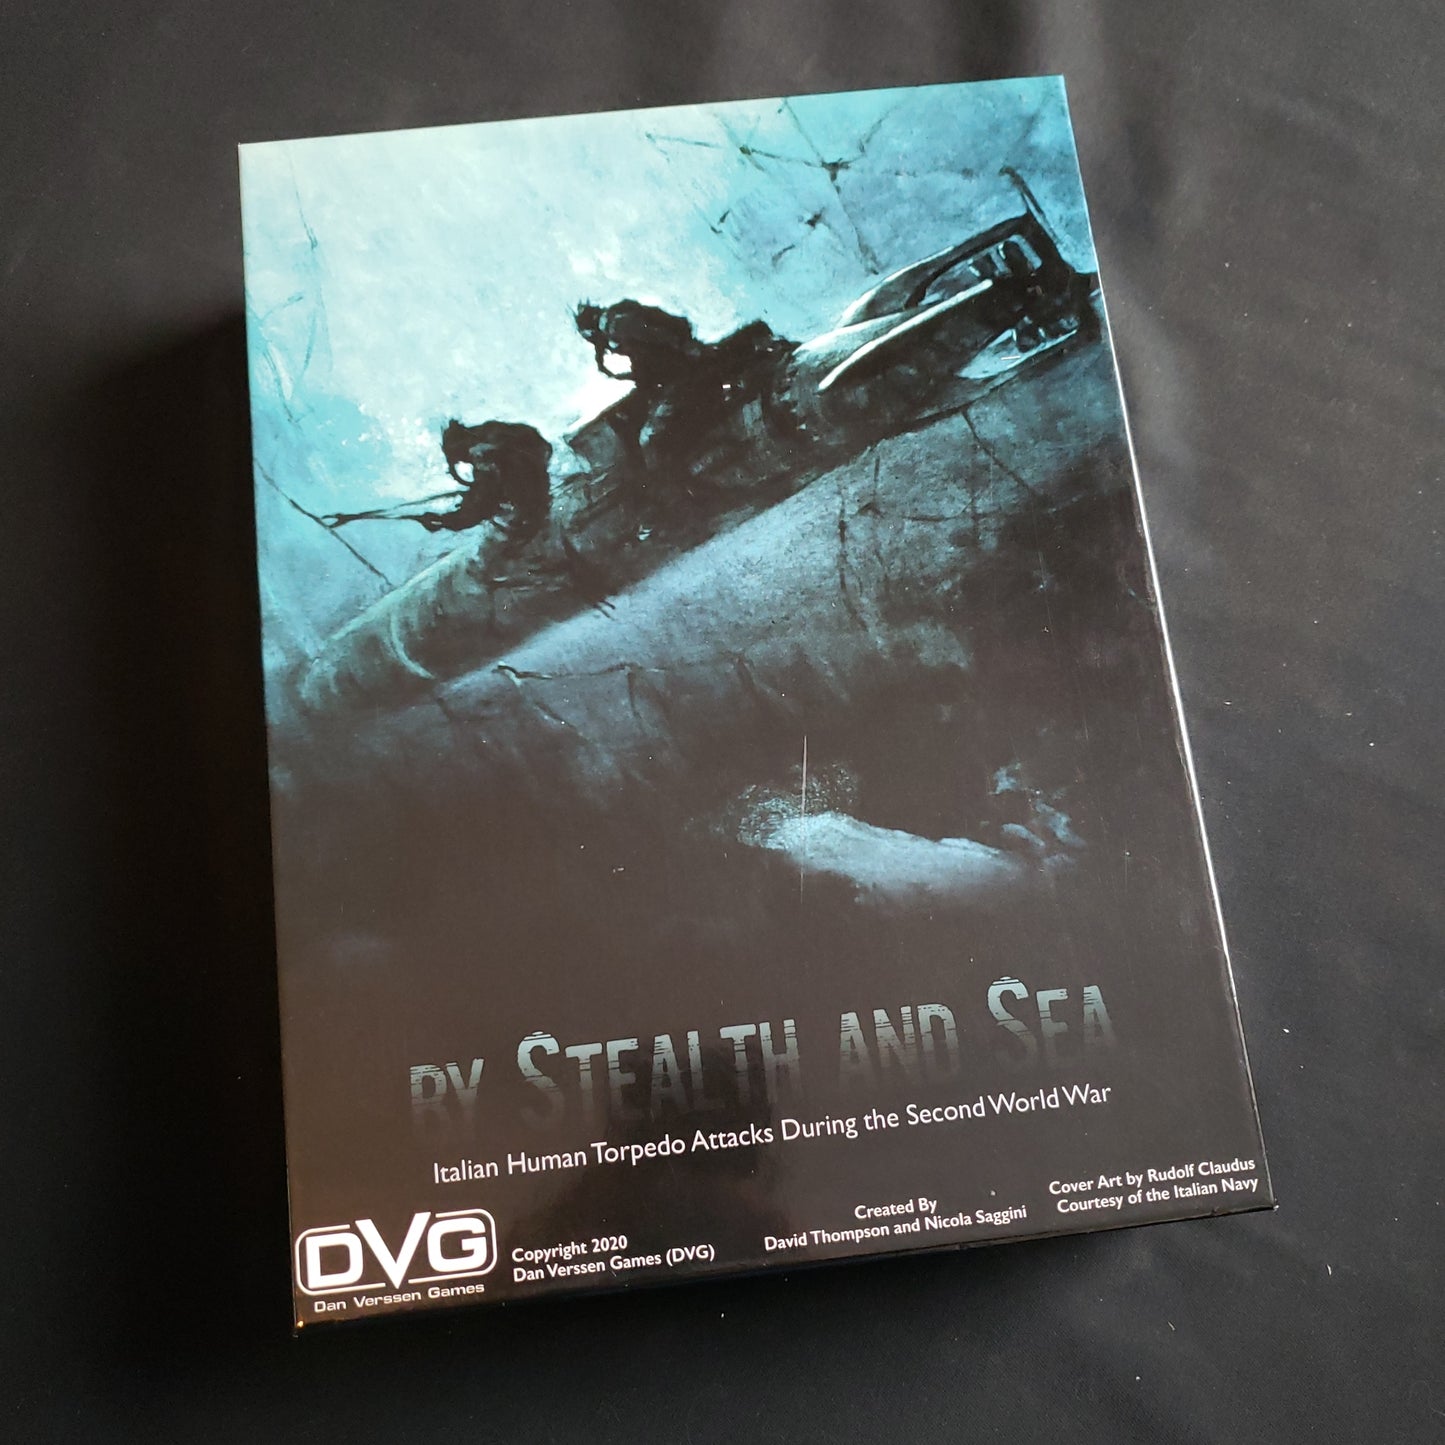 Image shows the front cover of the box of the By Stealth and Sea board game